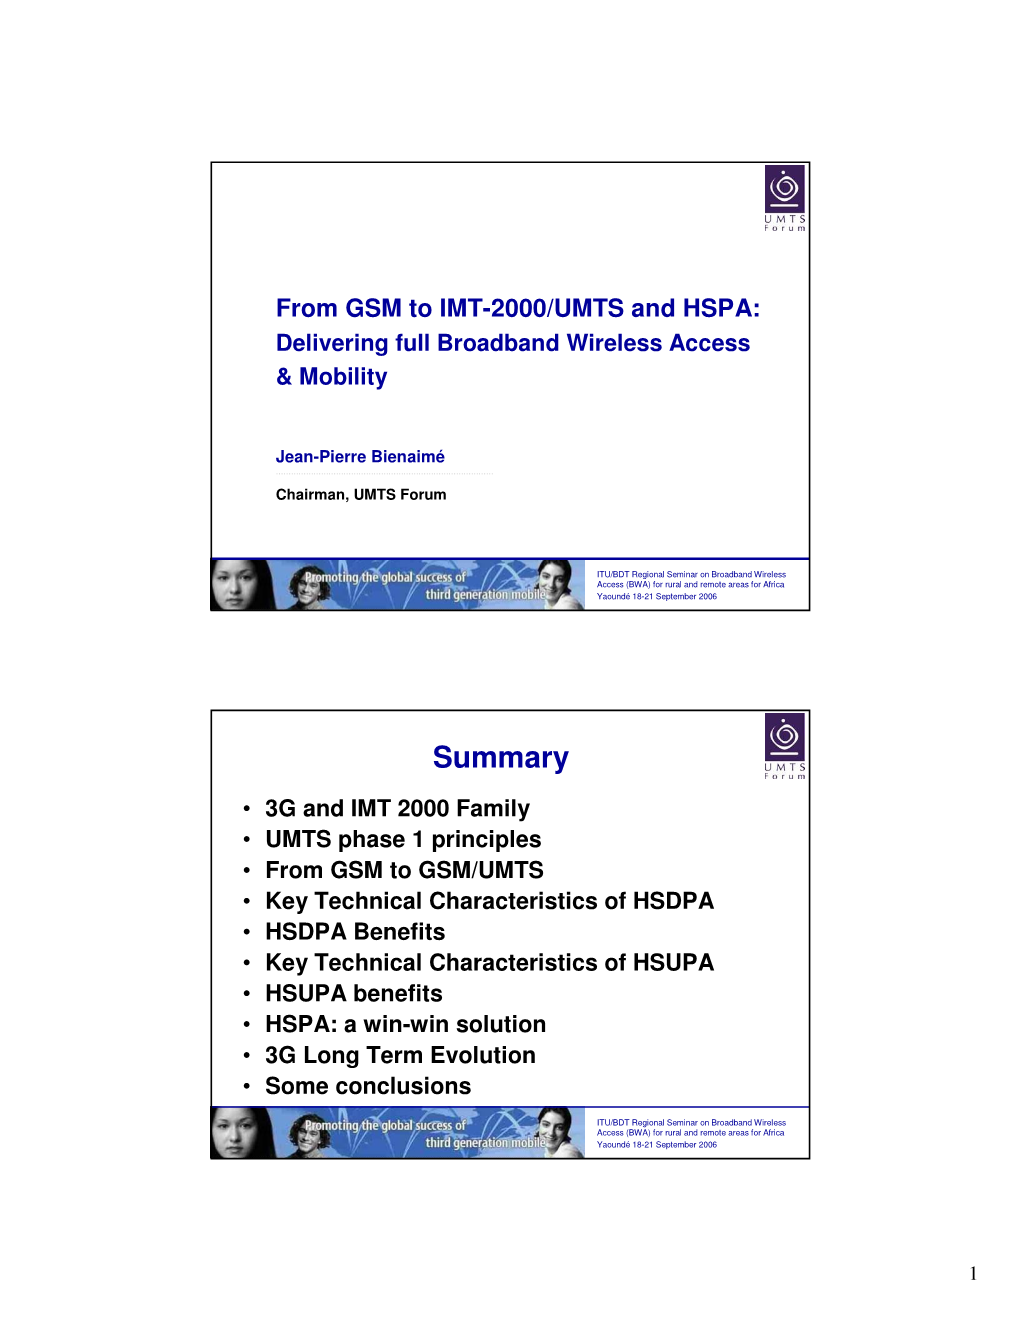 From GSM to IMT-2000/UMTS and HSPA: Delivering Full Broadband Wireless Access & Mobility